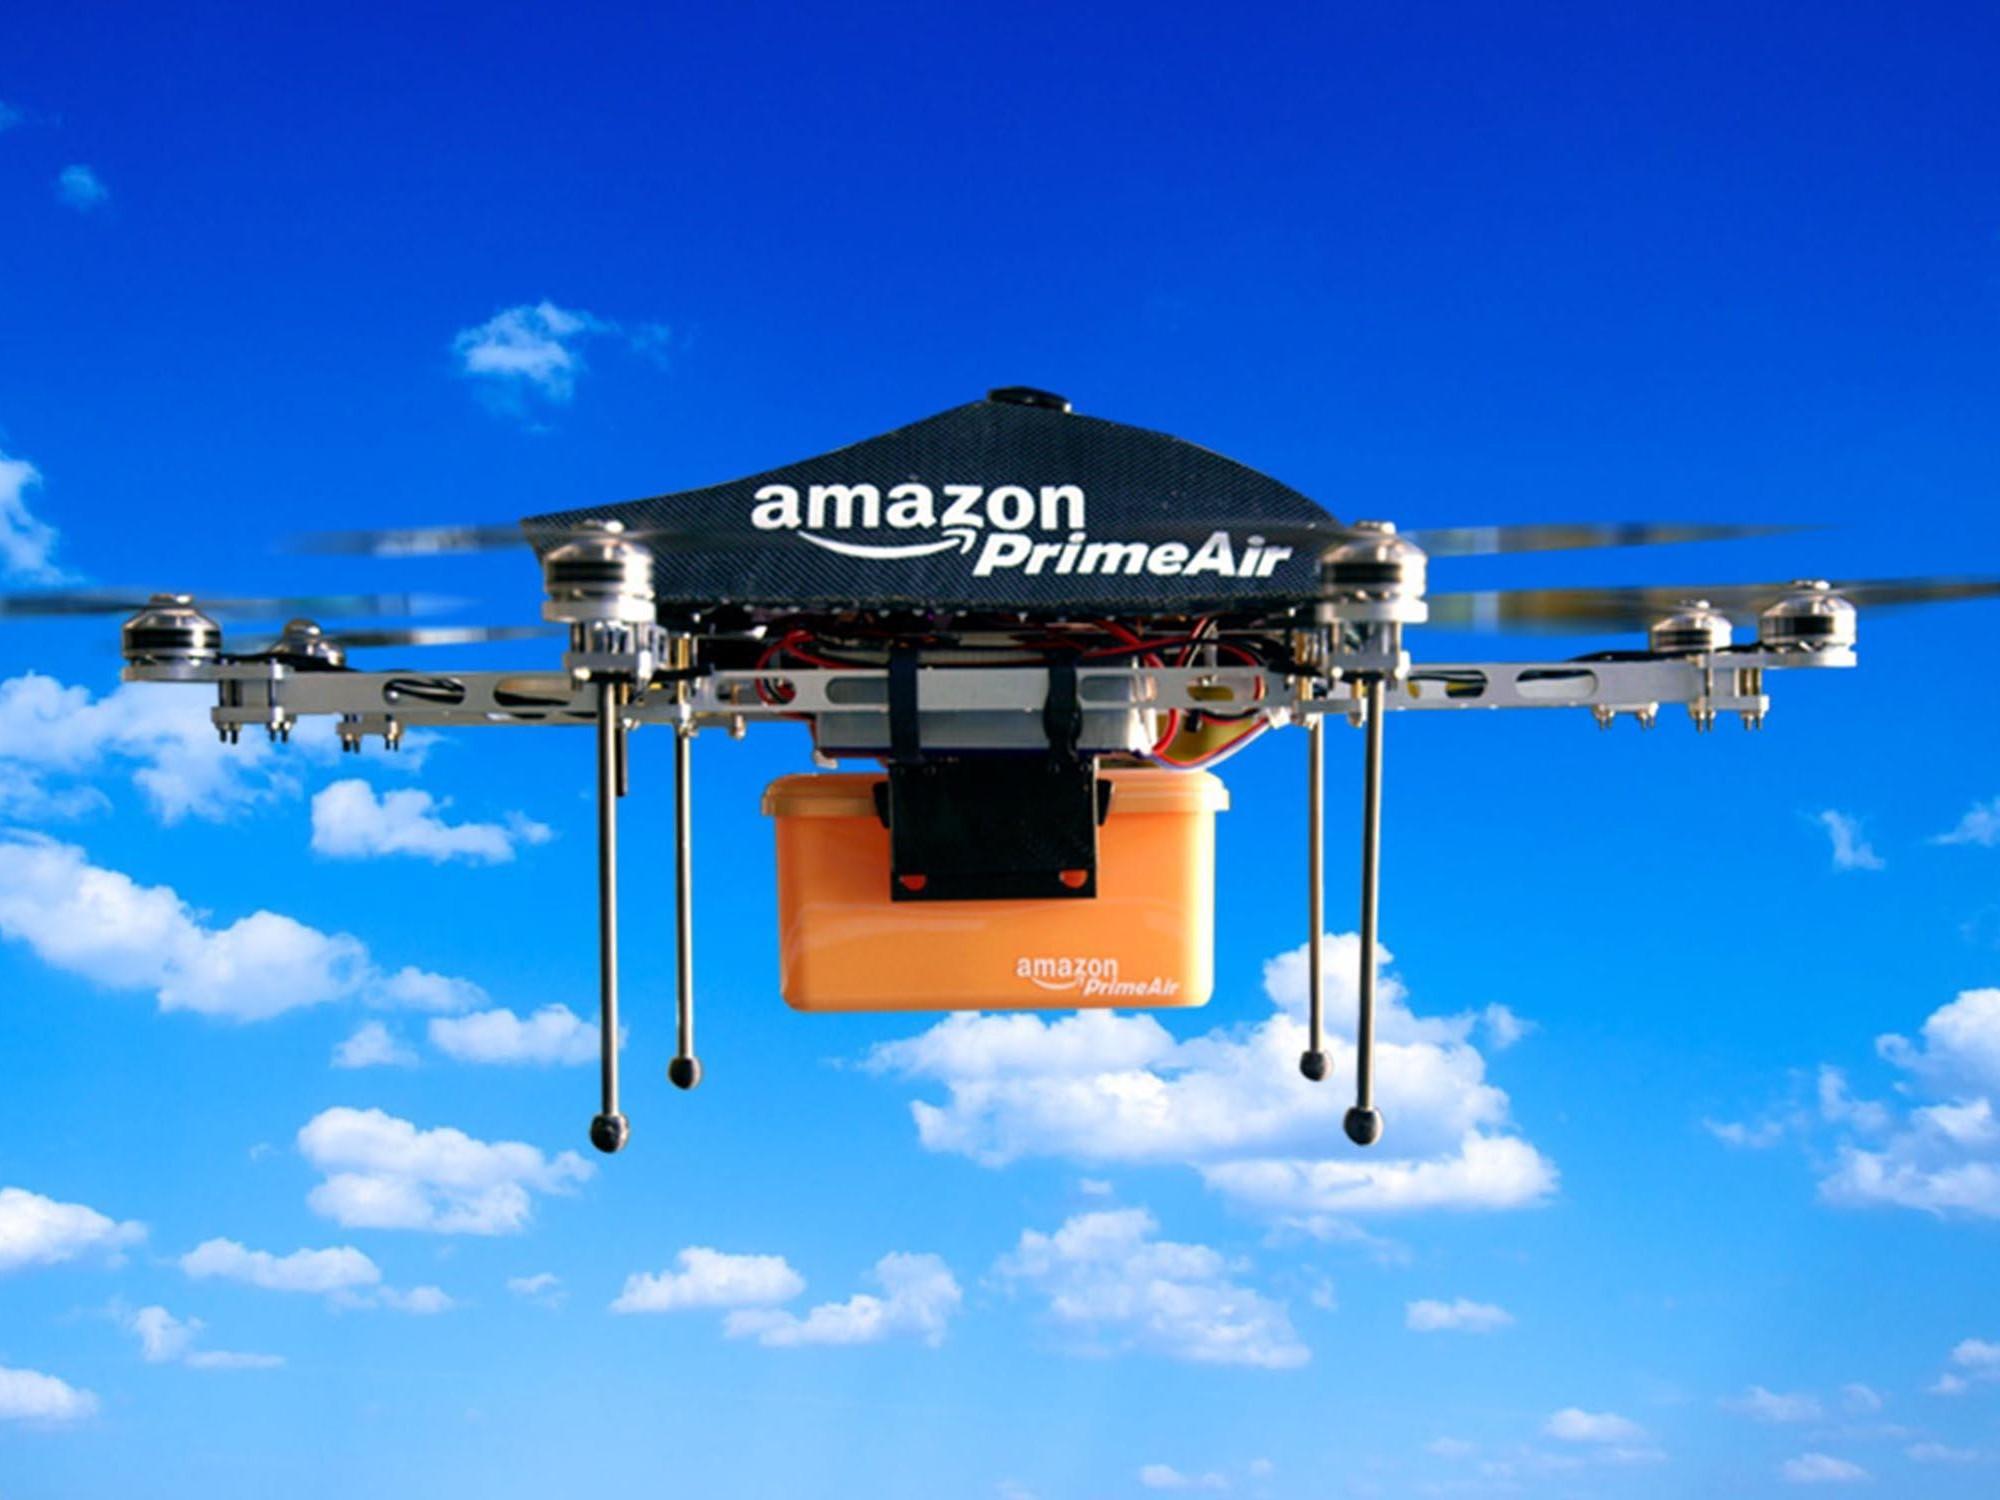 Amazon Prime Air hopes to deliver packages to customers with 30 minutes using drones